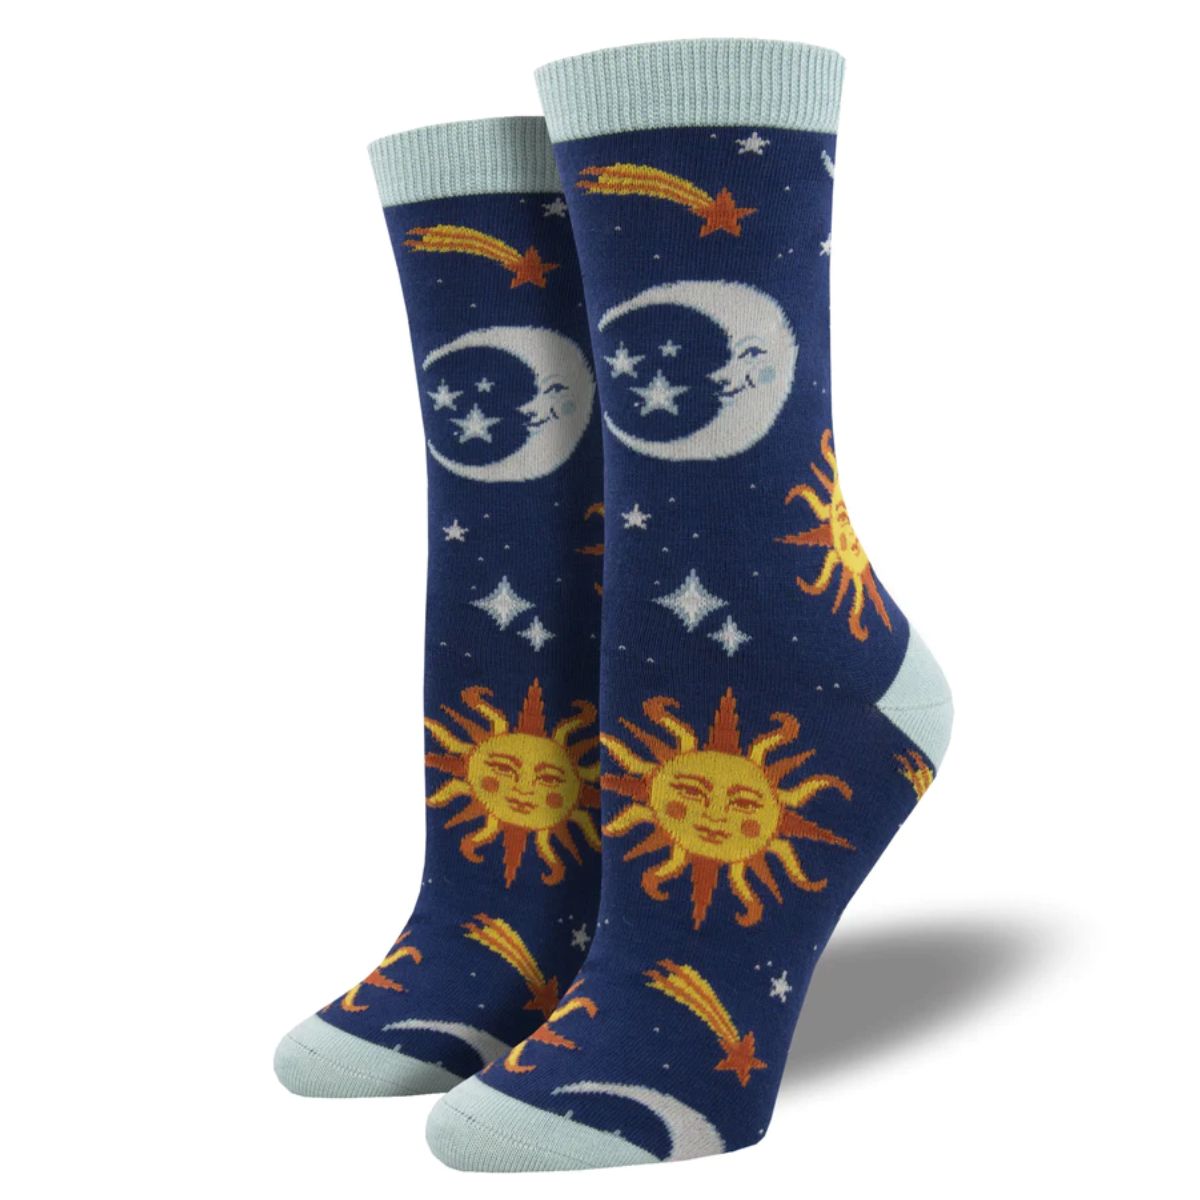 Clear Skies Socks a pair of navy blue socks with sun, moon and stars print